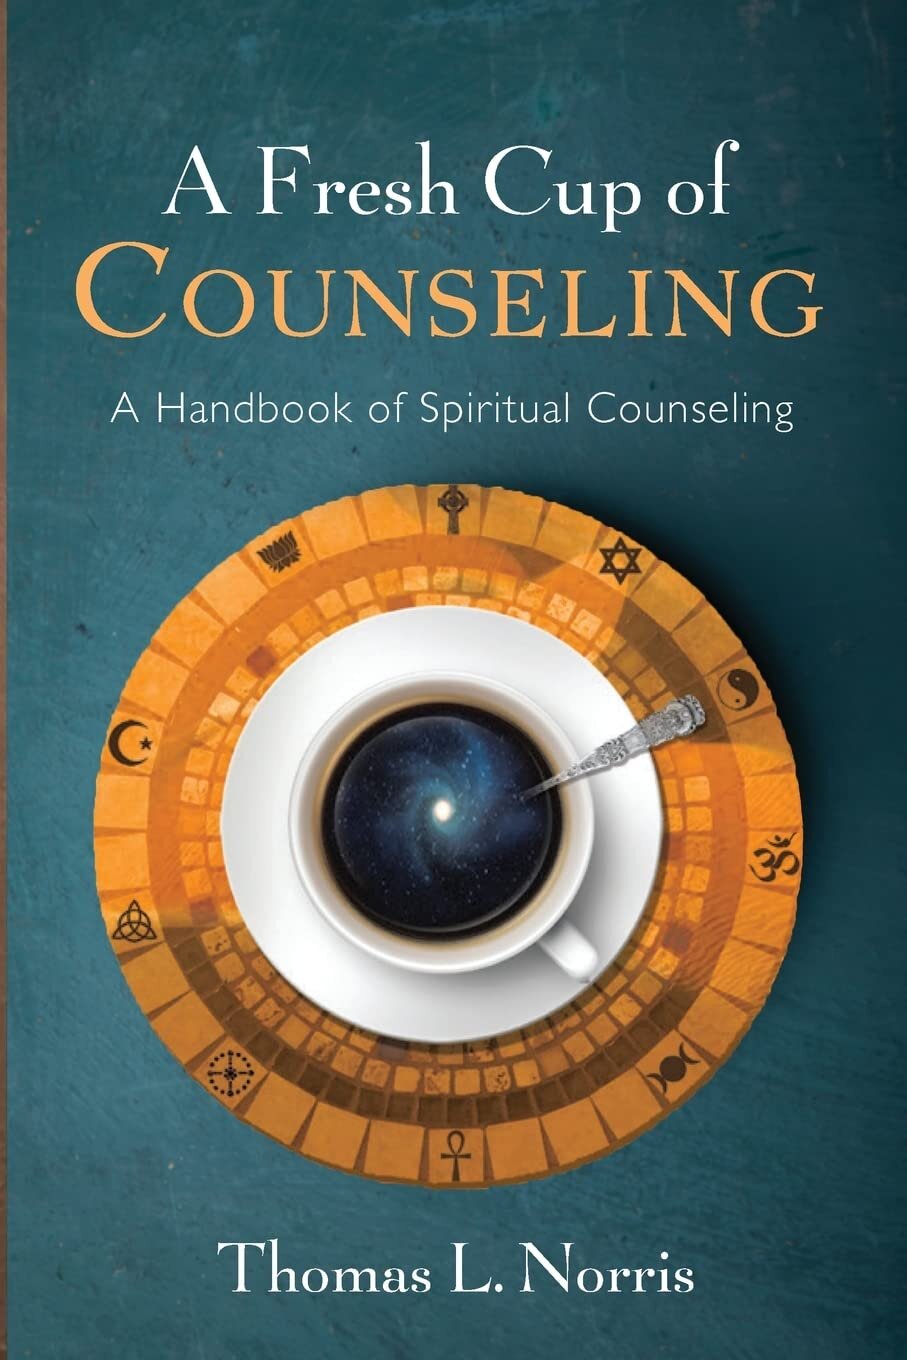 A Fresh Cup of Counseling: A Handbook of Spiritual Counseling